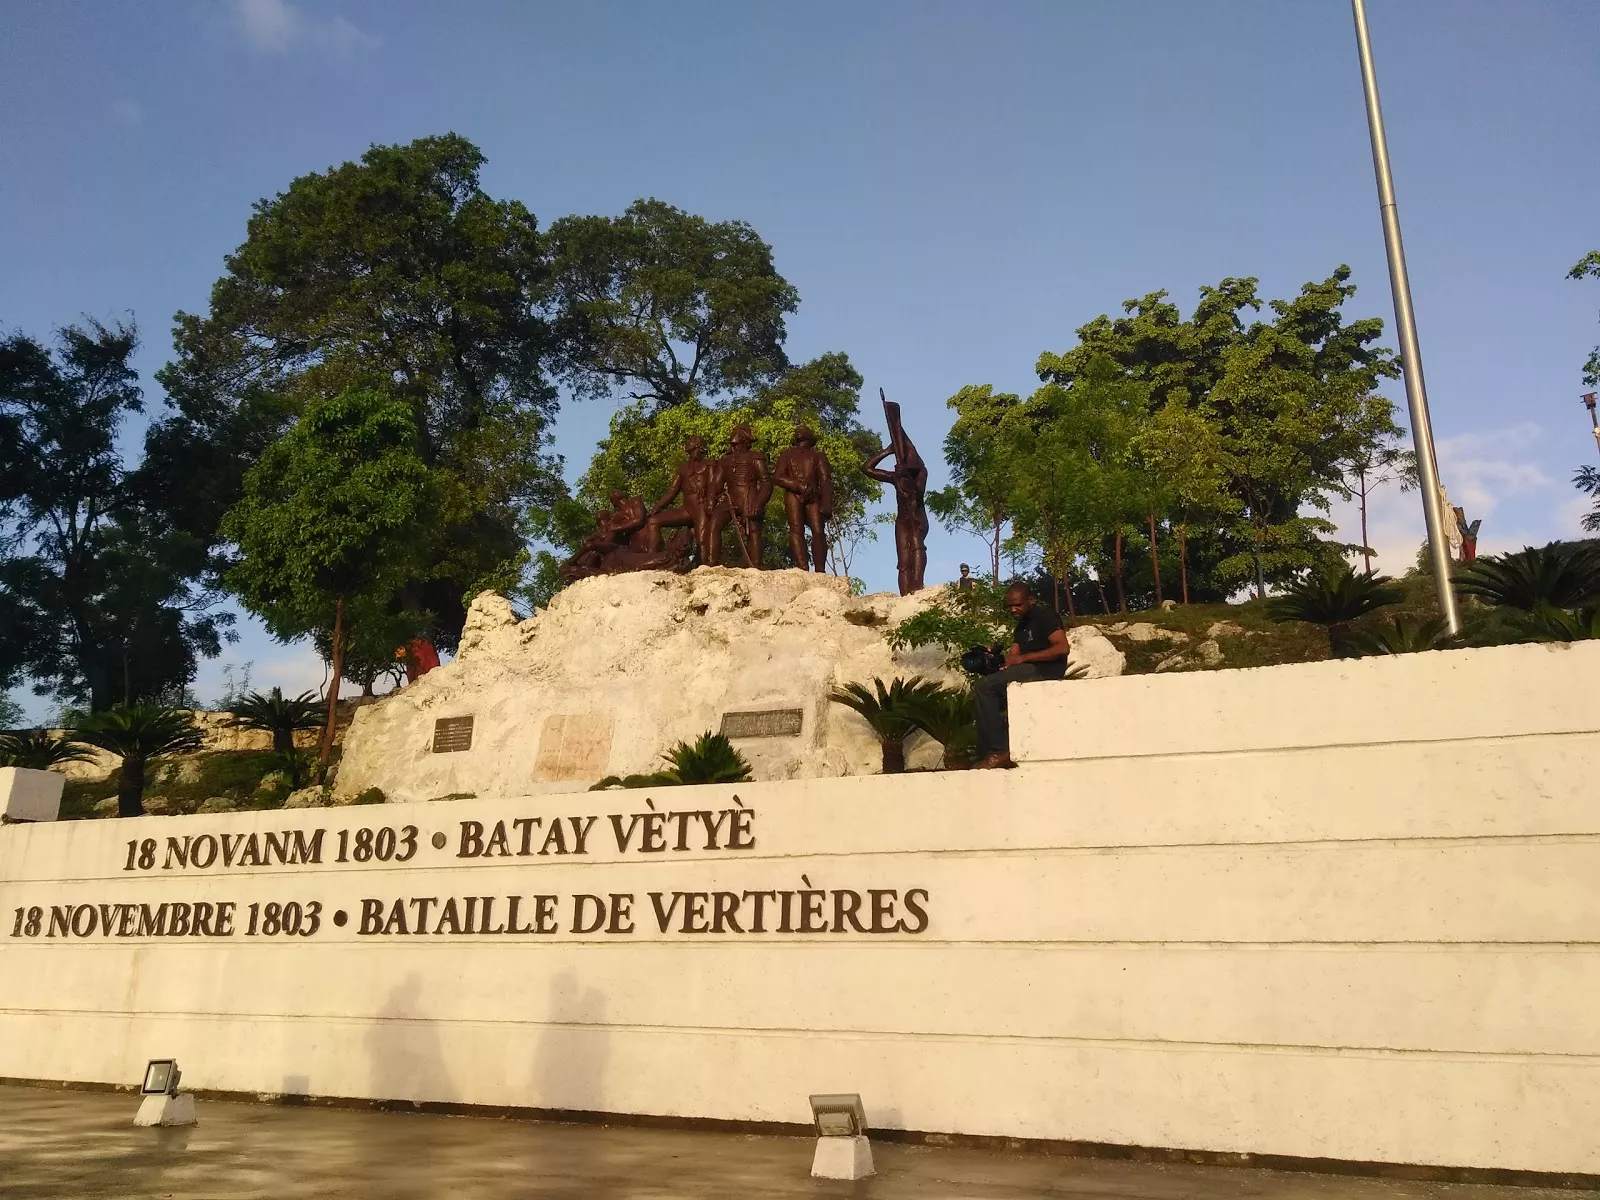 The Heros de Vertieres in Haiti, Caribbean | Monuments - Rated 3.3